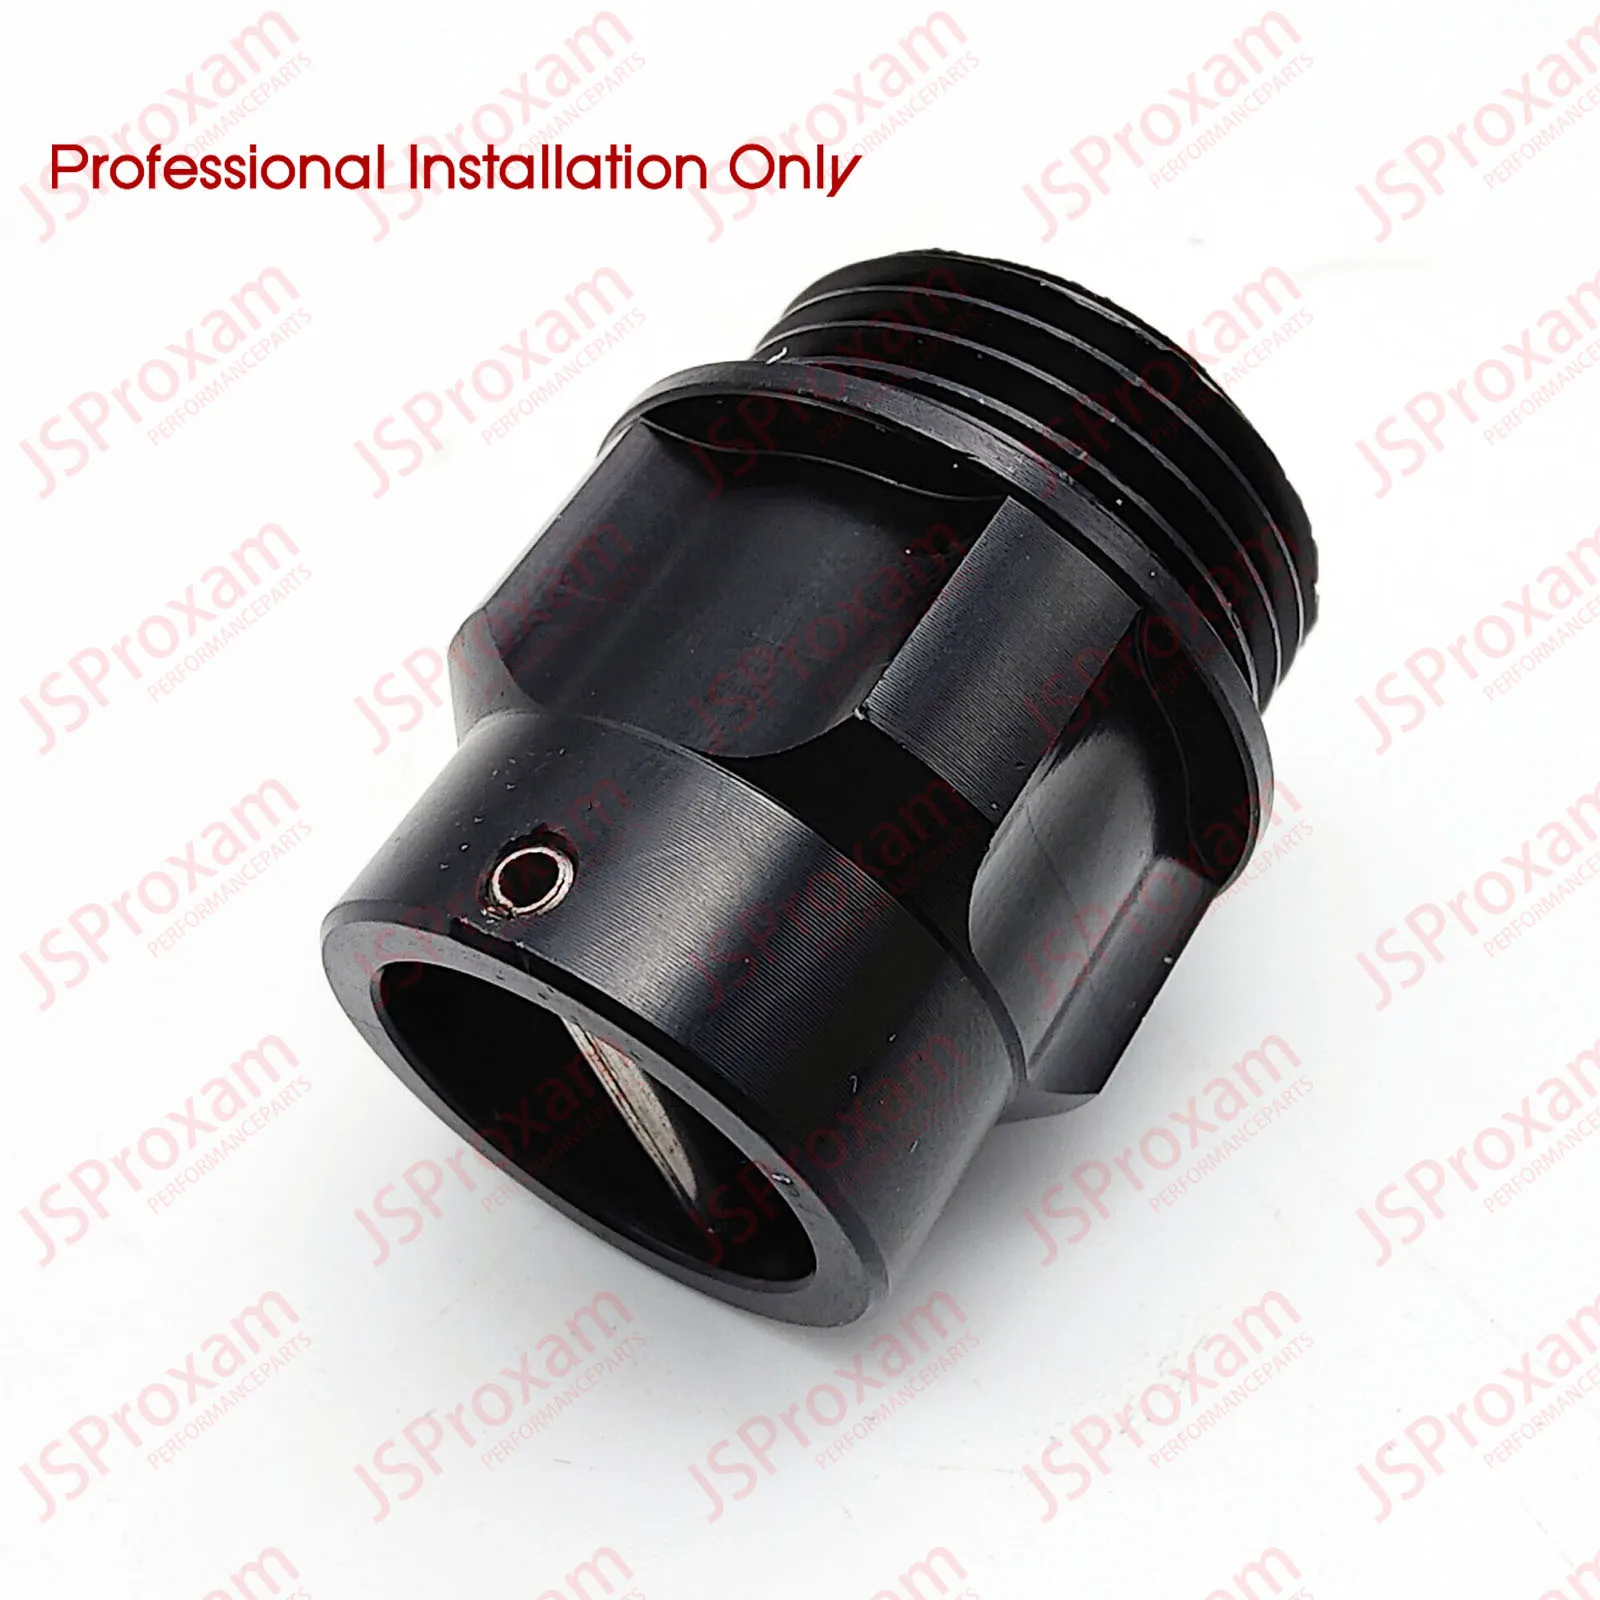 

06-01-073 Replaces Fits For SeaDoo 06-01-073 Vacate Valve Anodized Black Blowsion